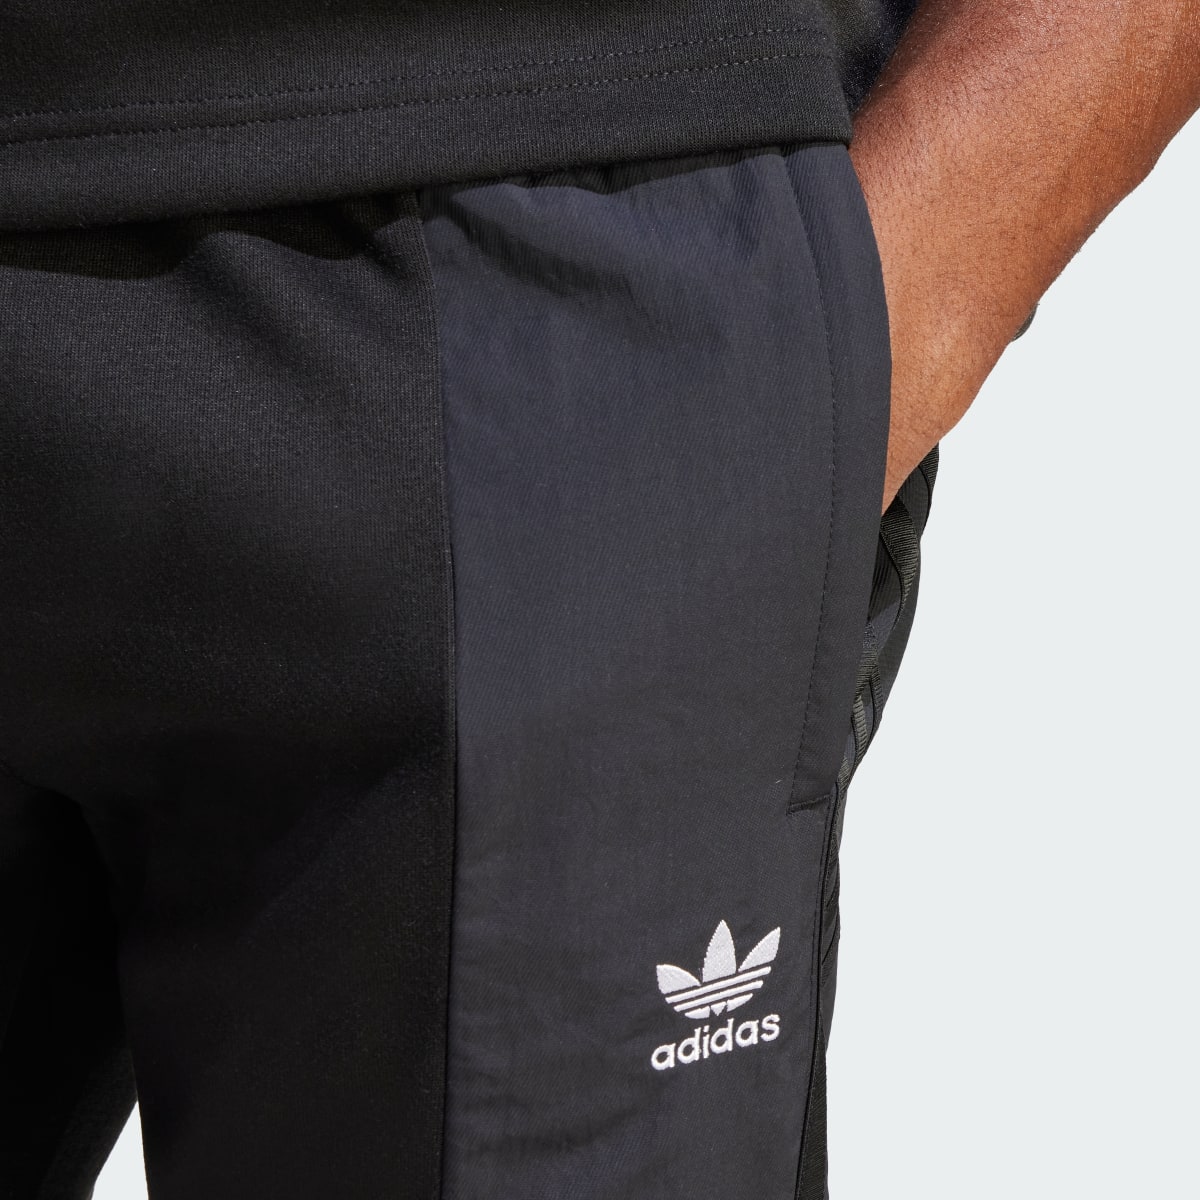 Adidas Adicolor Re-Pro SST Material Mix Tracksuit Bottoms. 5